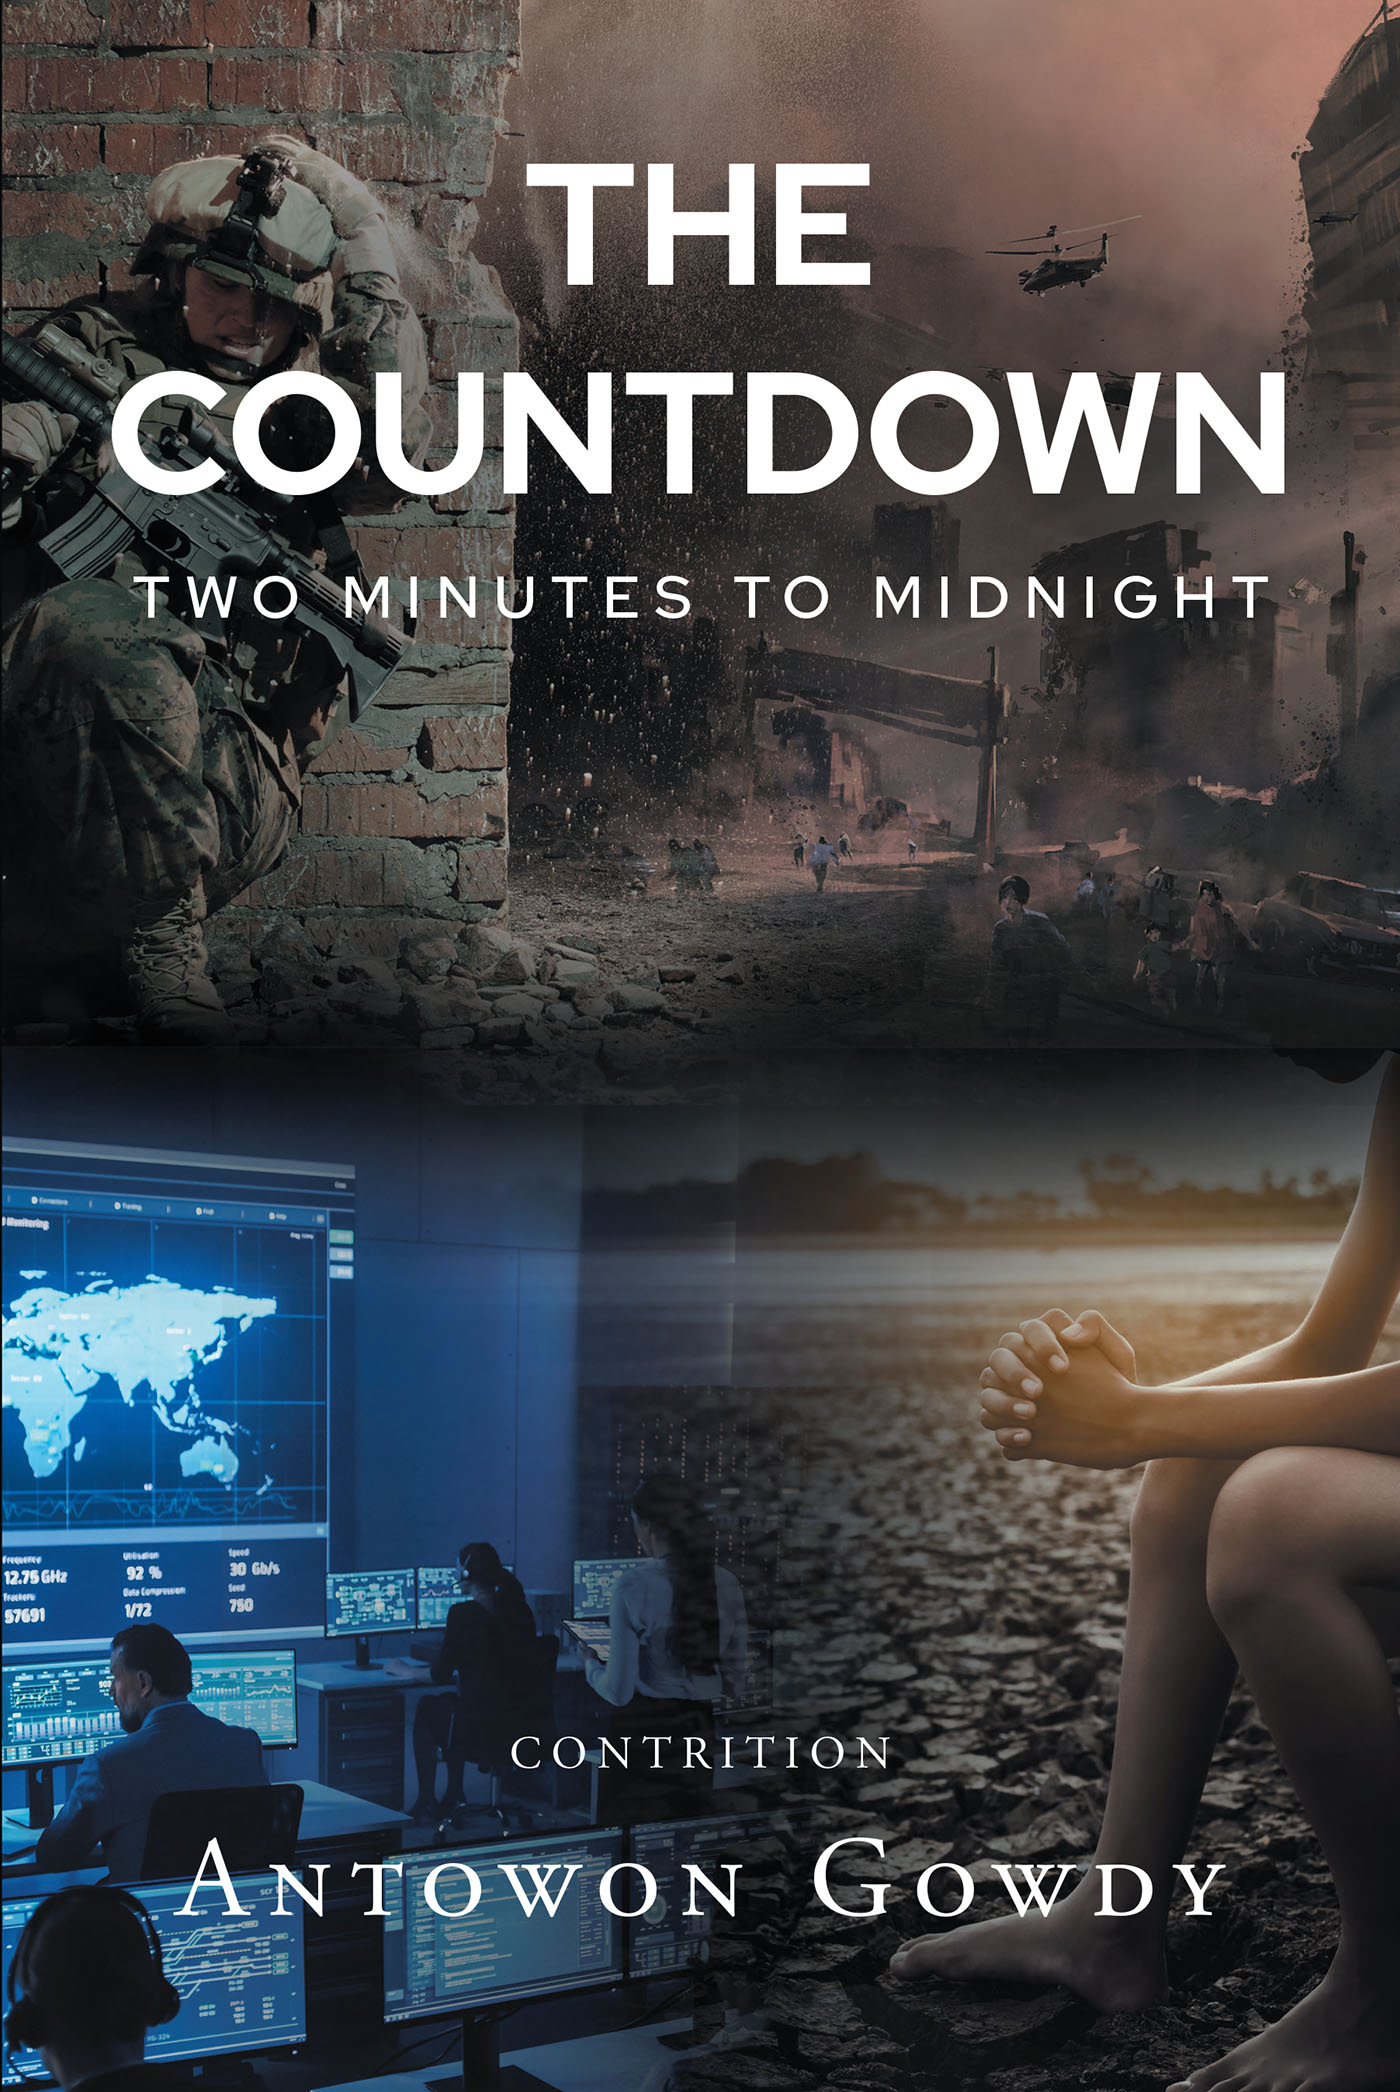 Author Antowon Gowdy’s New Book, "The Countdown: Two Minutes to Midnight," is the First Captivating First Installment of the "Contrition" Series